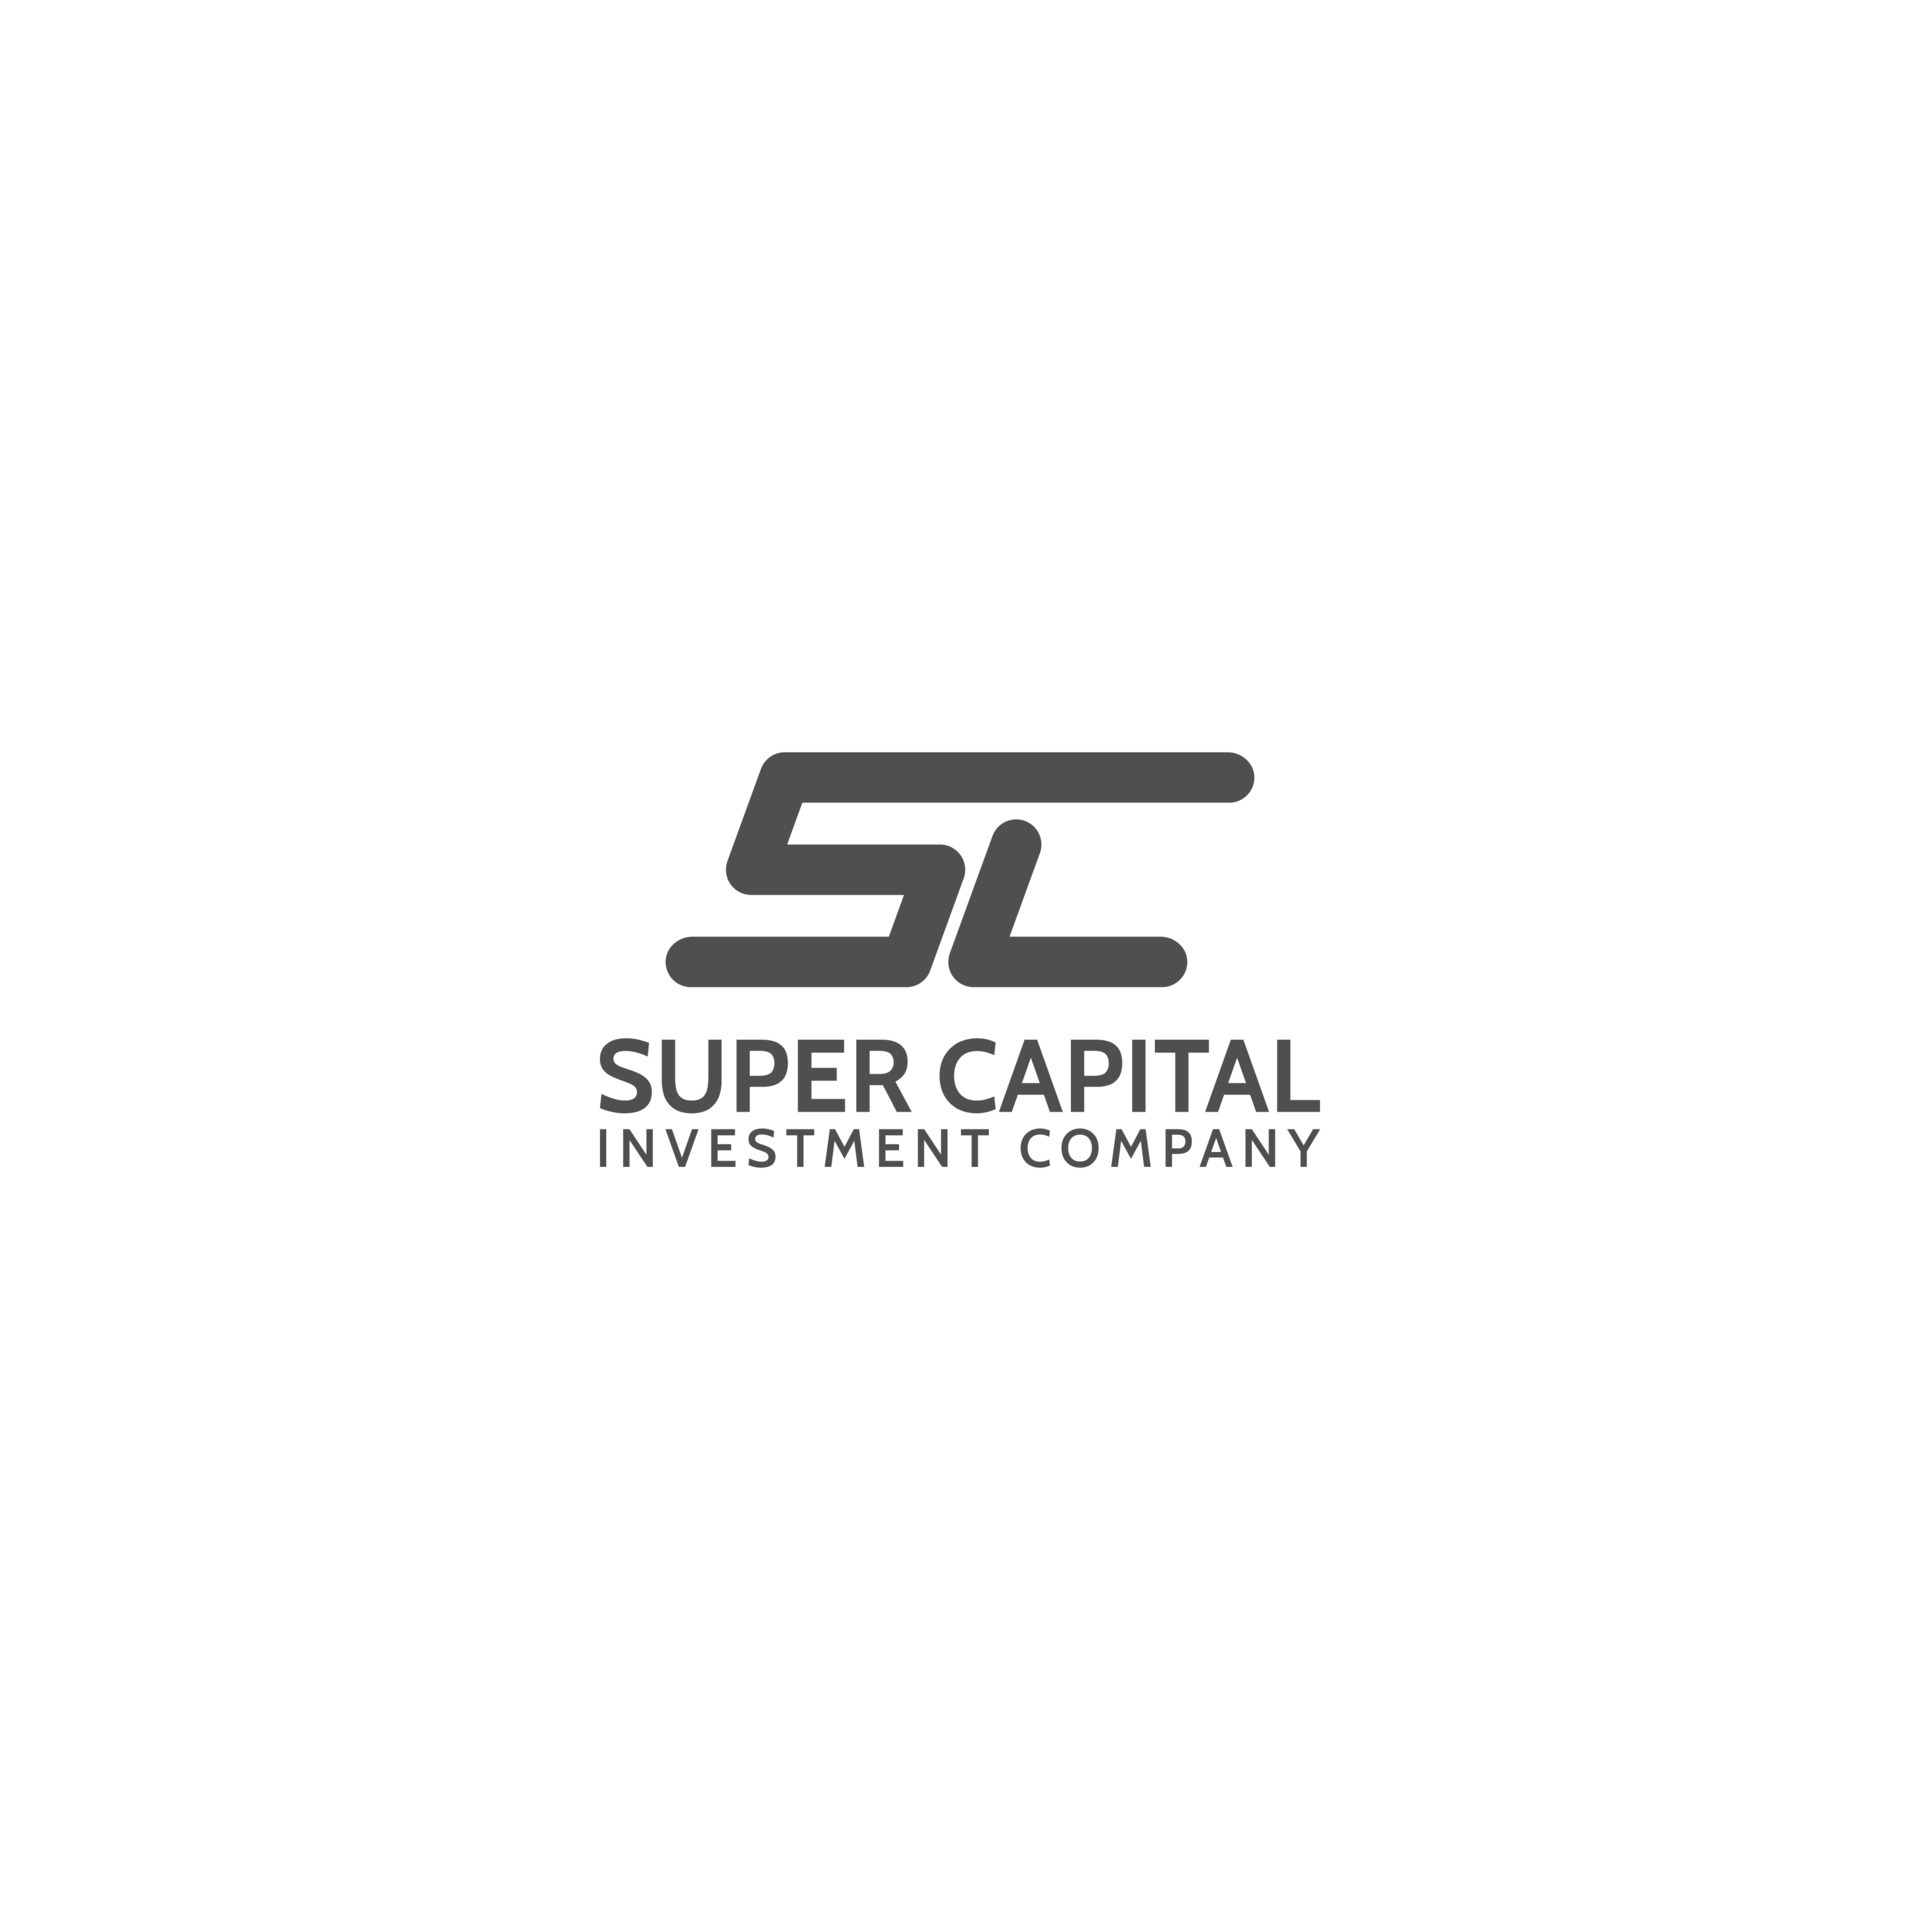 abstract initial letter S and C logo in grey color isolated in white  background applied for capital investment company logo also suitable for  the brands or companies that have initial name SC